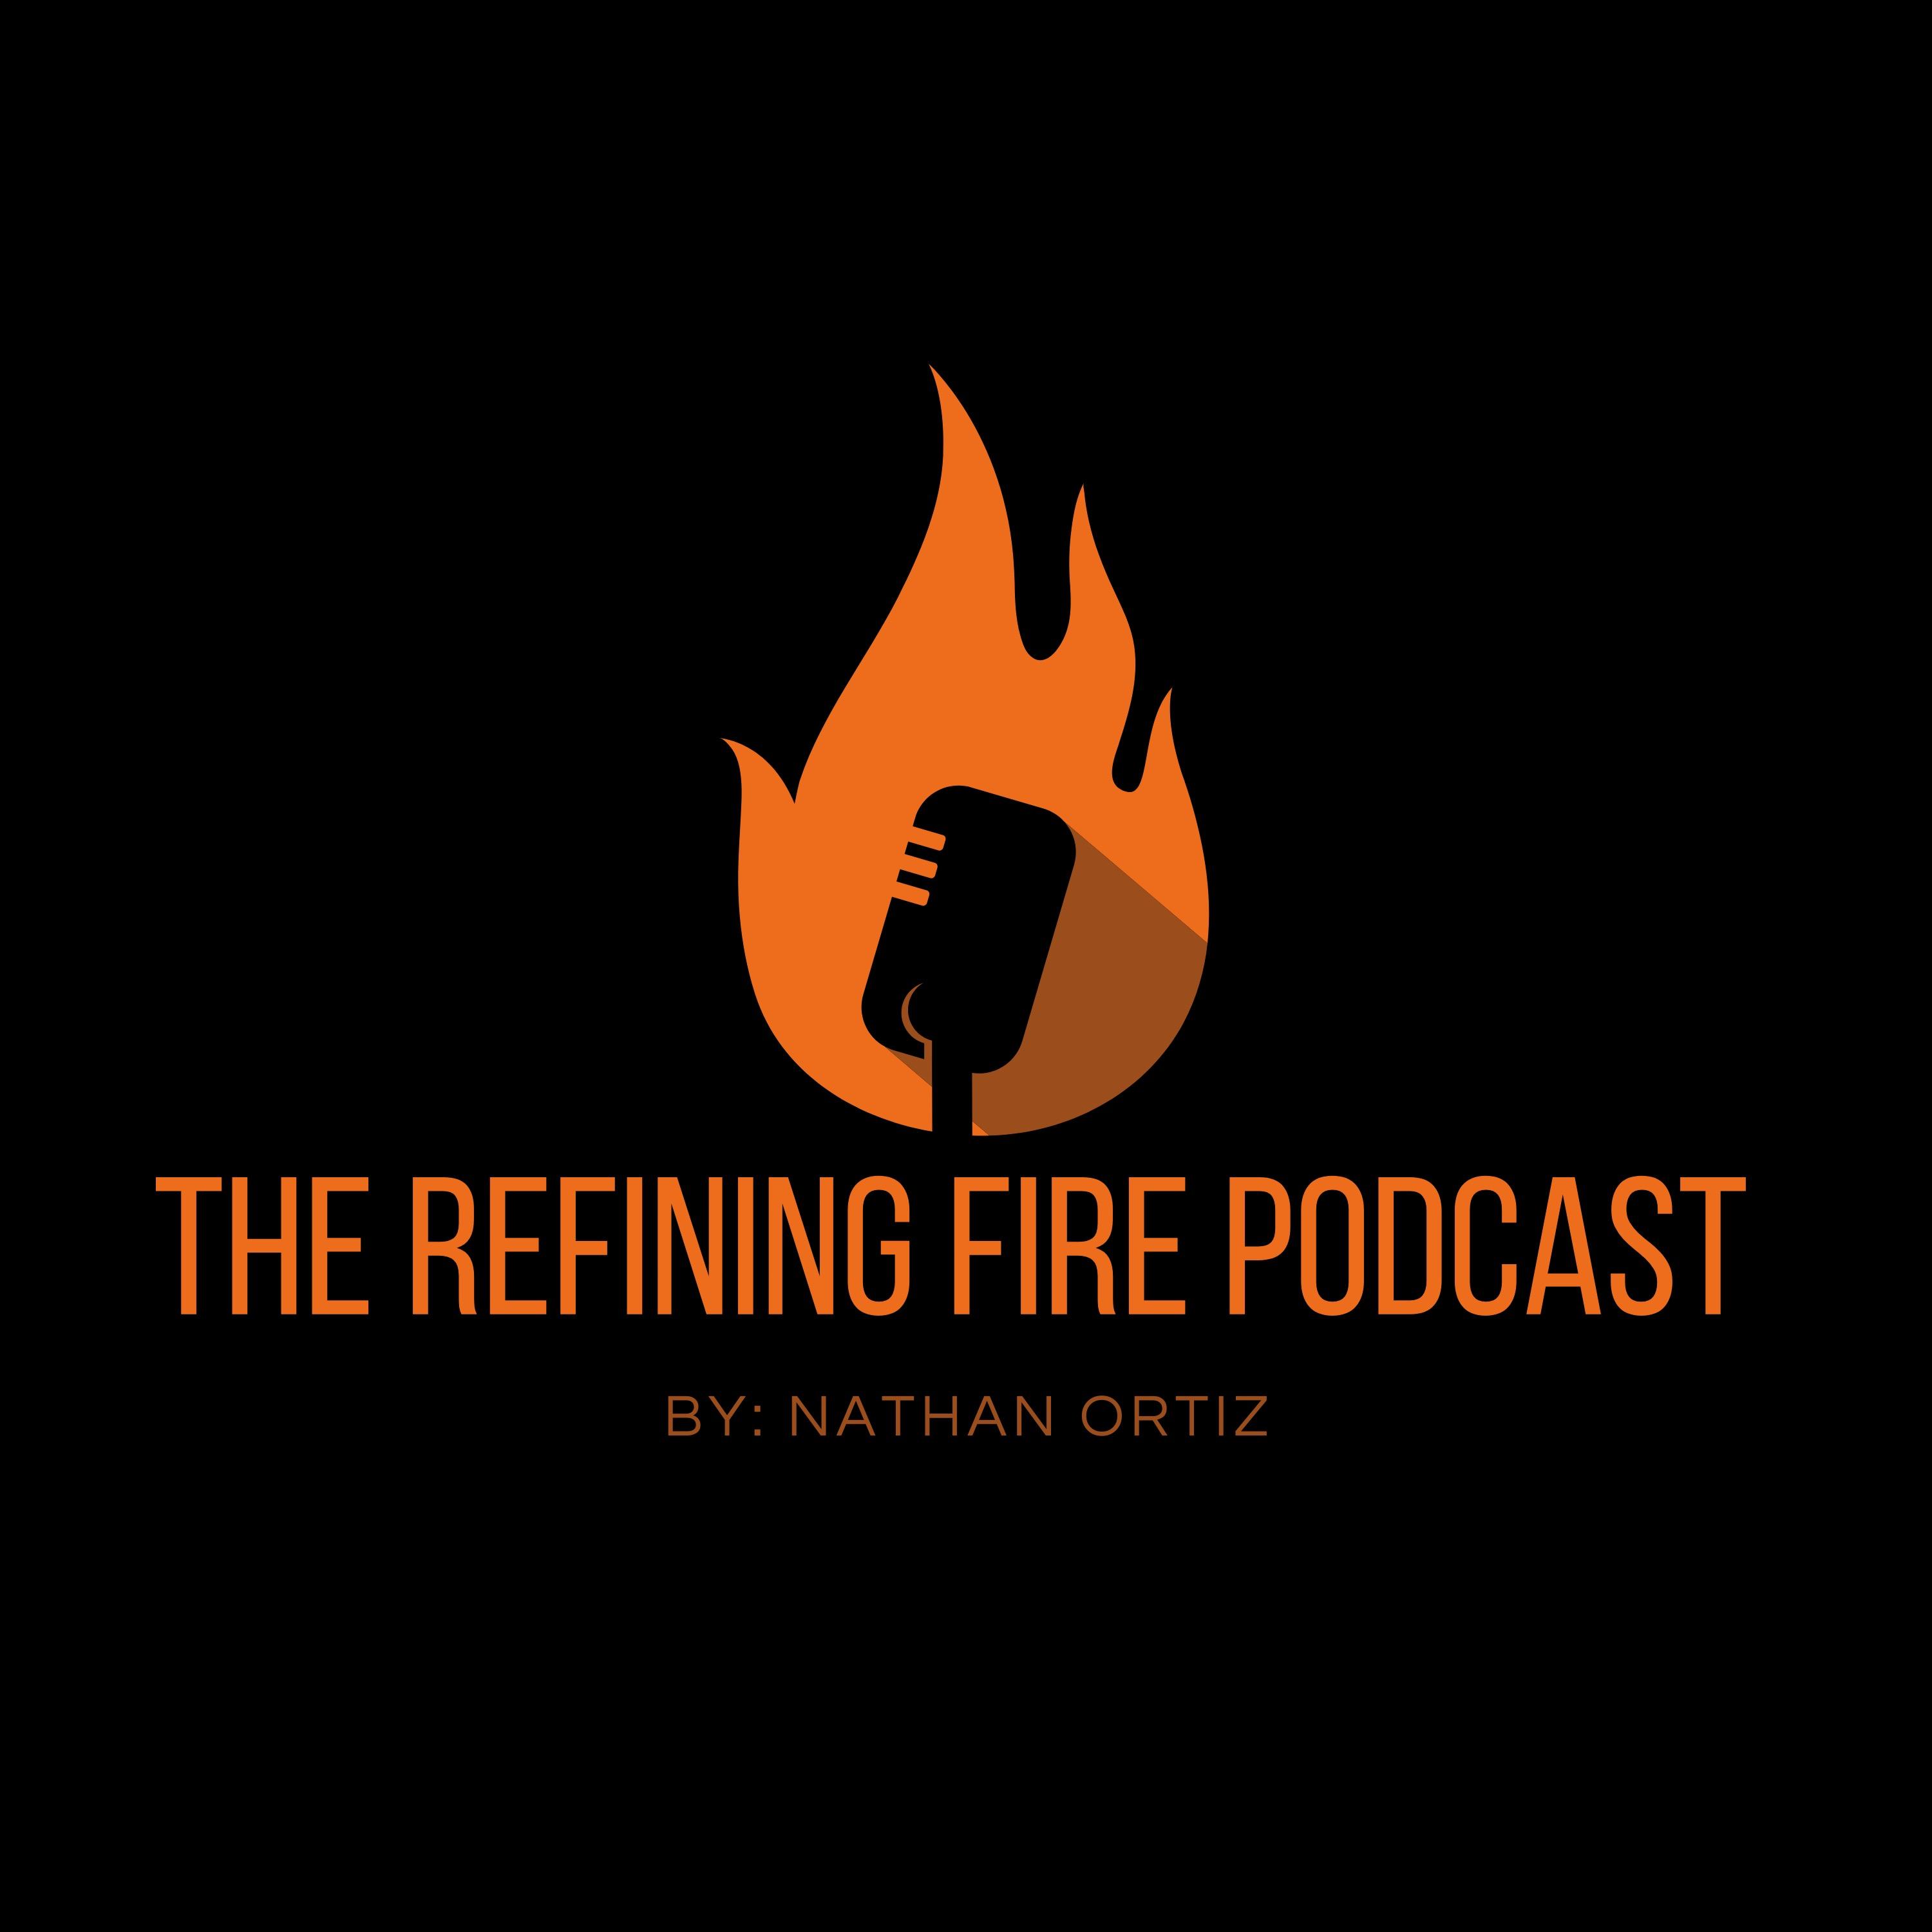 The Refining Fire Podcast